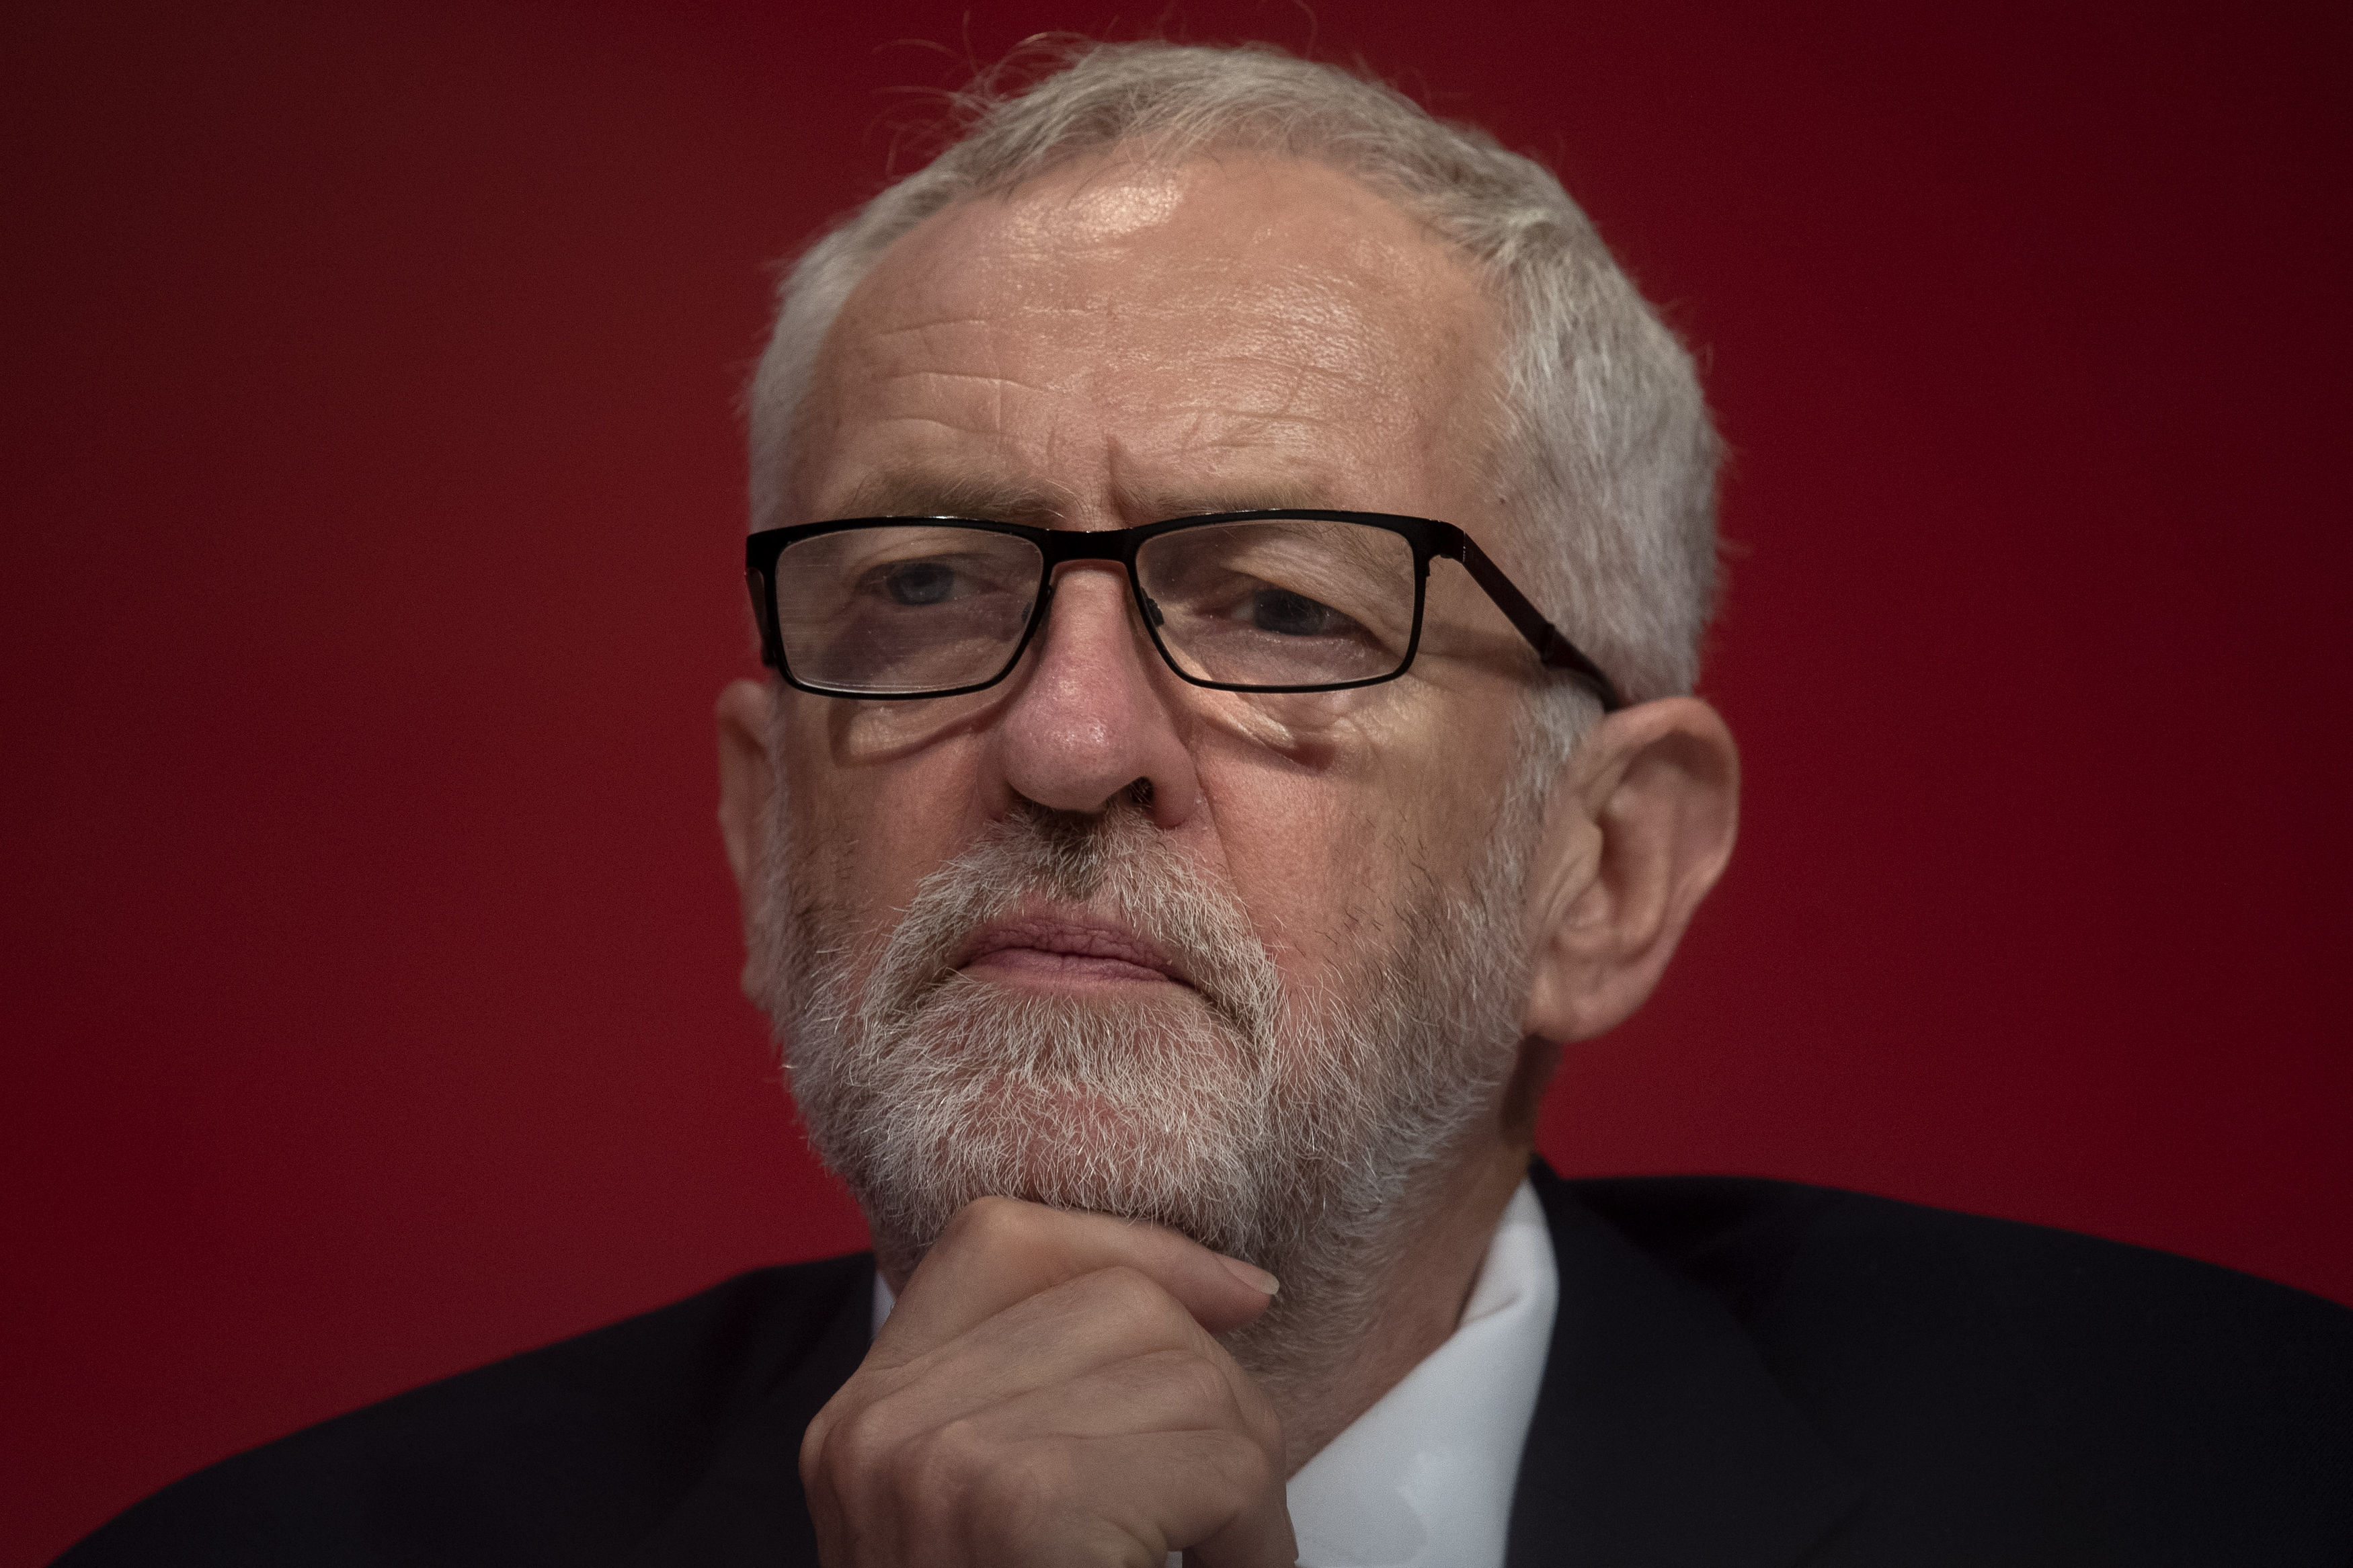 Sylvestre is accused of threatening to burn down the office of former Labour leader Jeremy Corbyn (pictured). Image: PA.